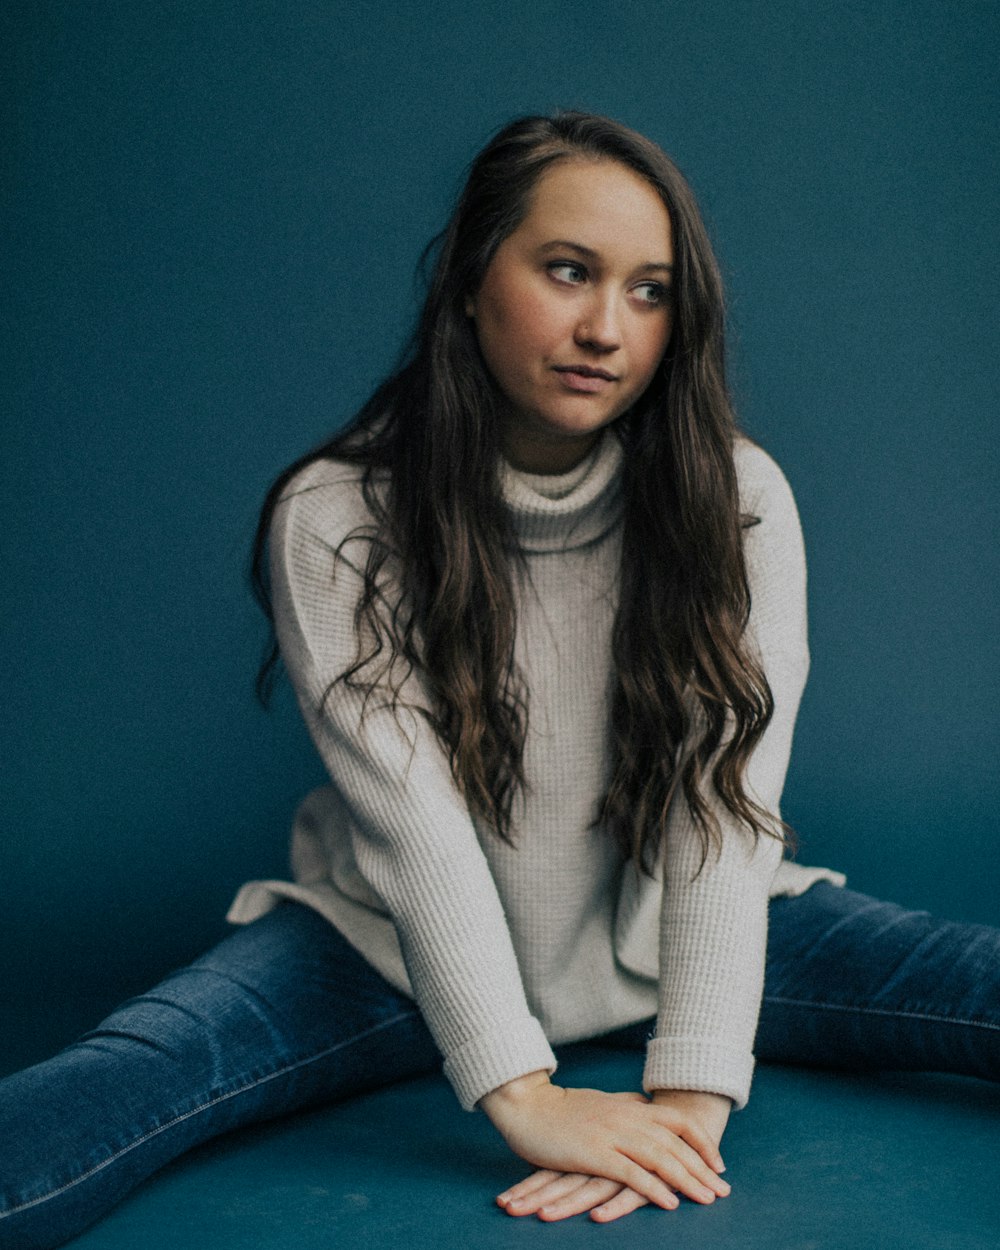 woman in white turtleneck sweater and blue denim jeans sitting on blue couch